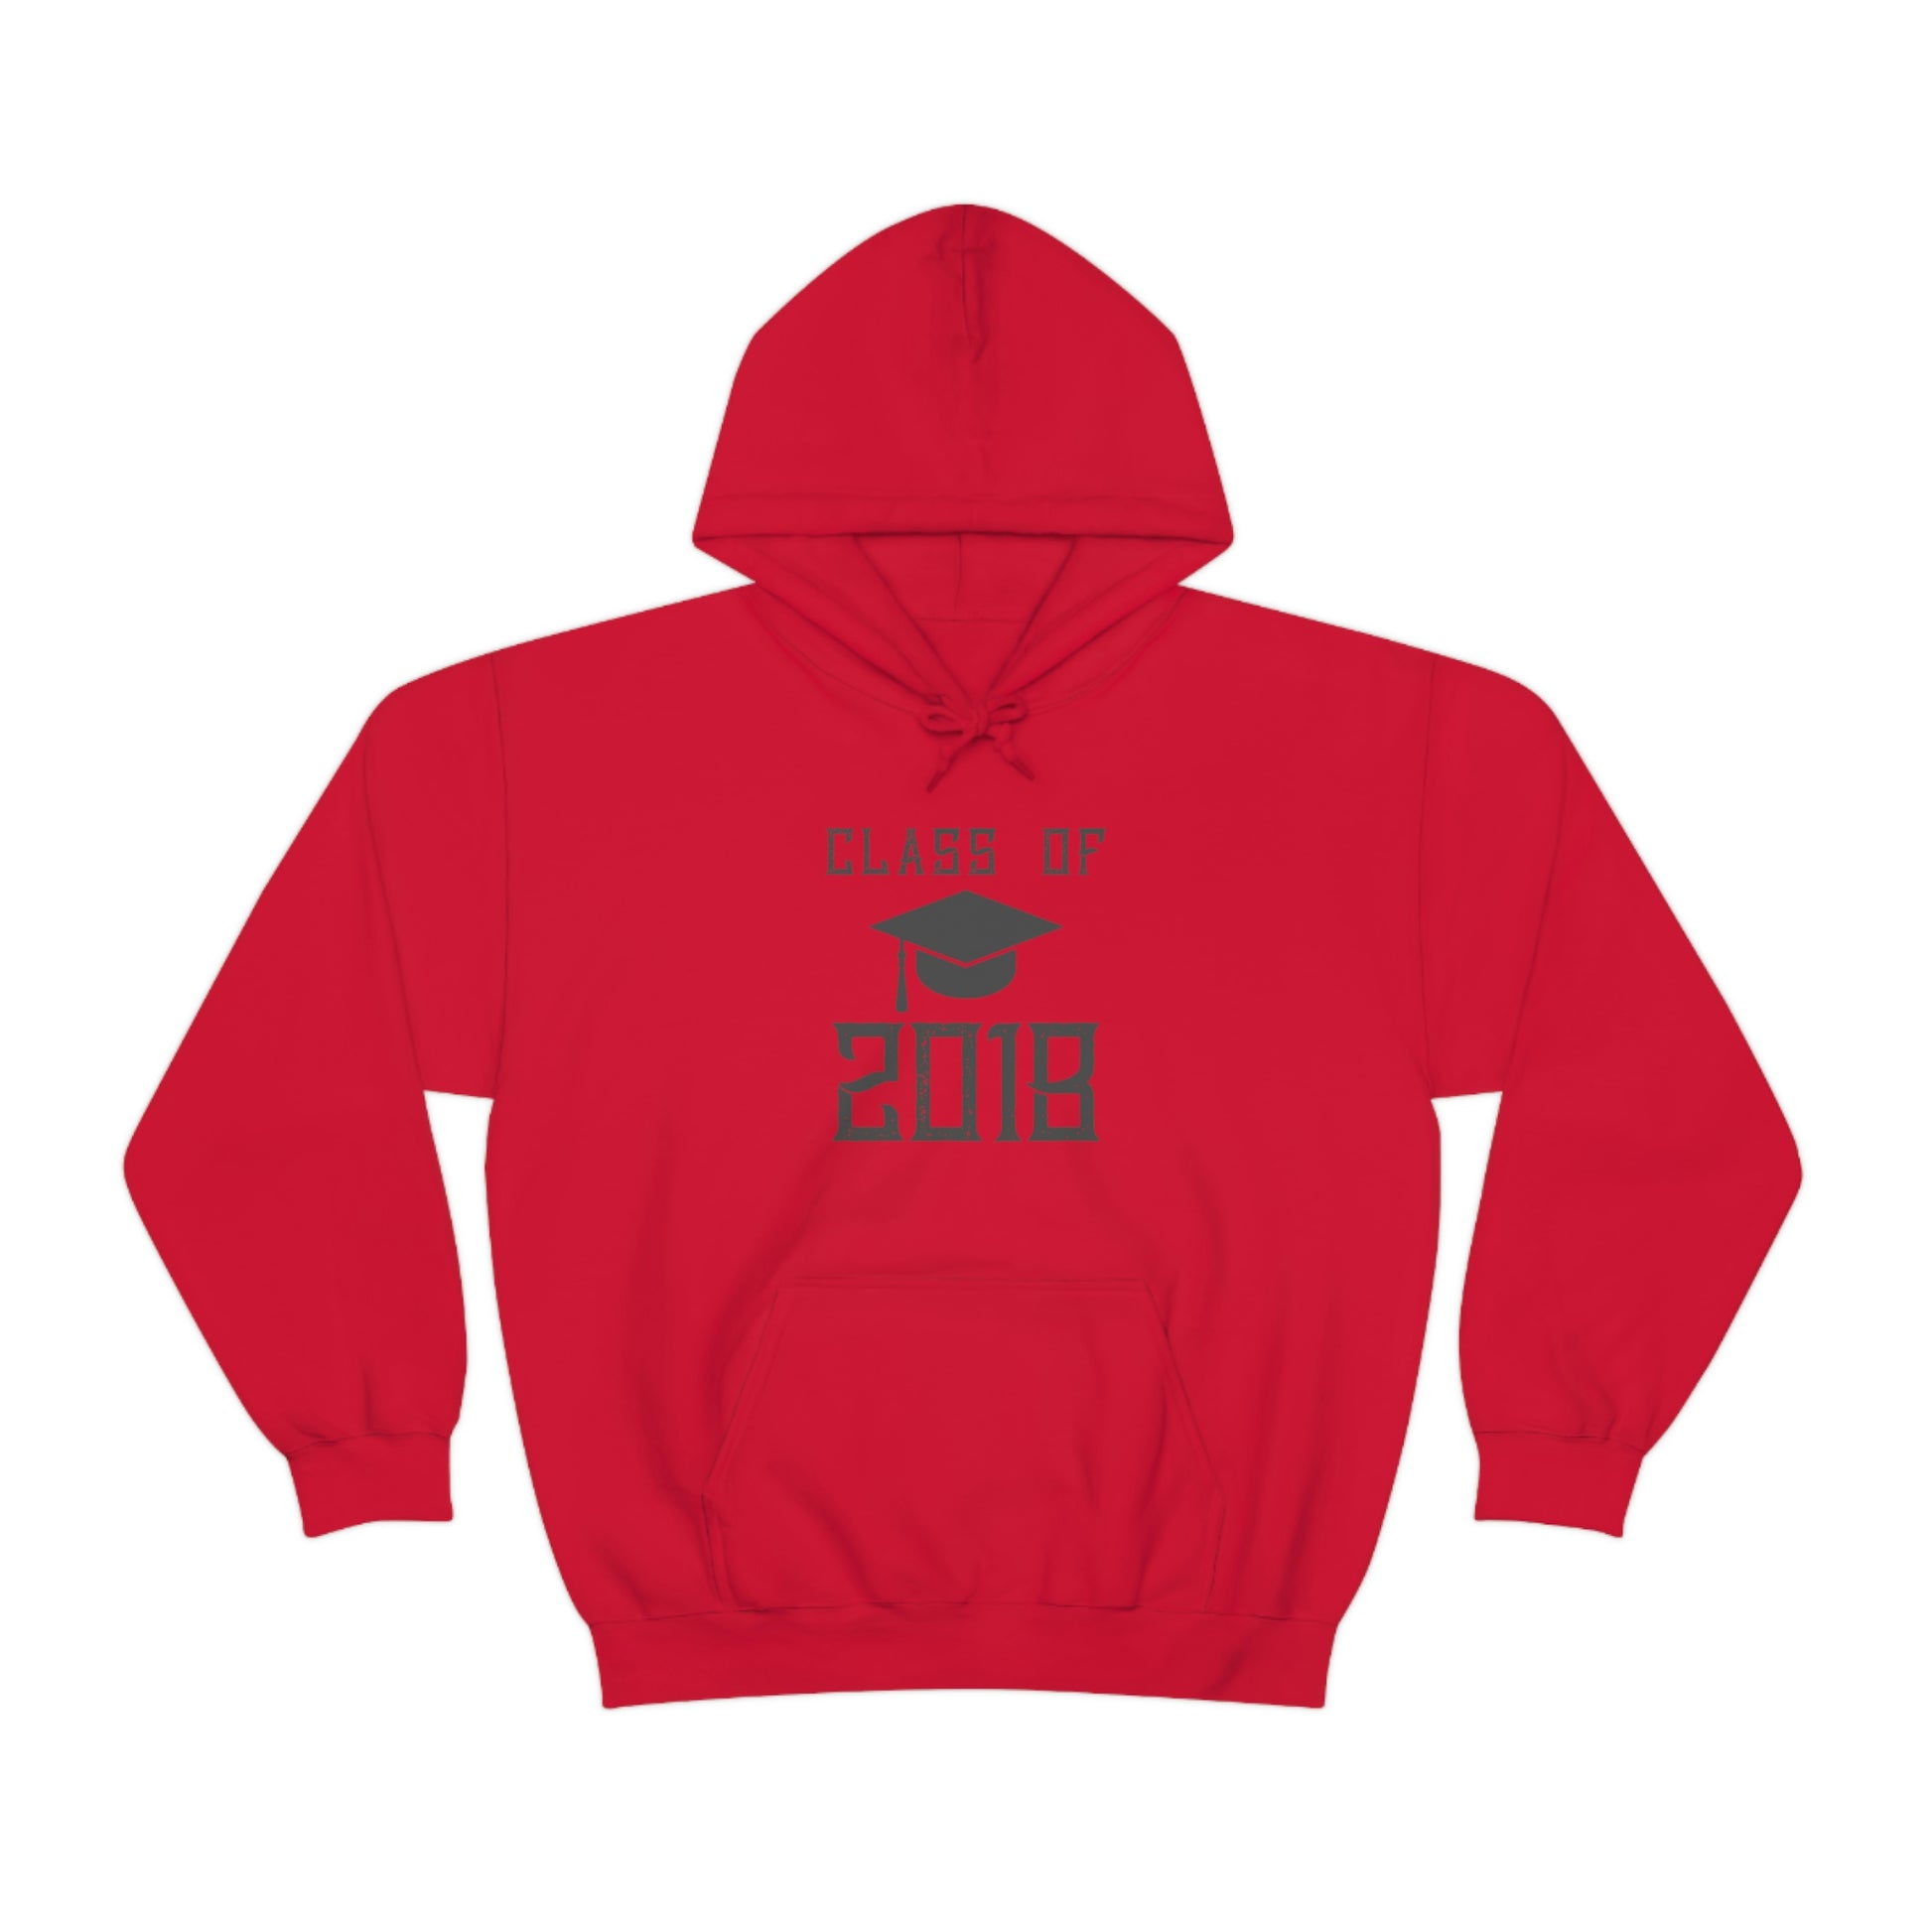 "Class Of 2018" Hoodie - Weave Got Gifts - Unique Gifts You Won’t Find Anywhere Else!